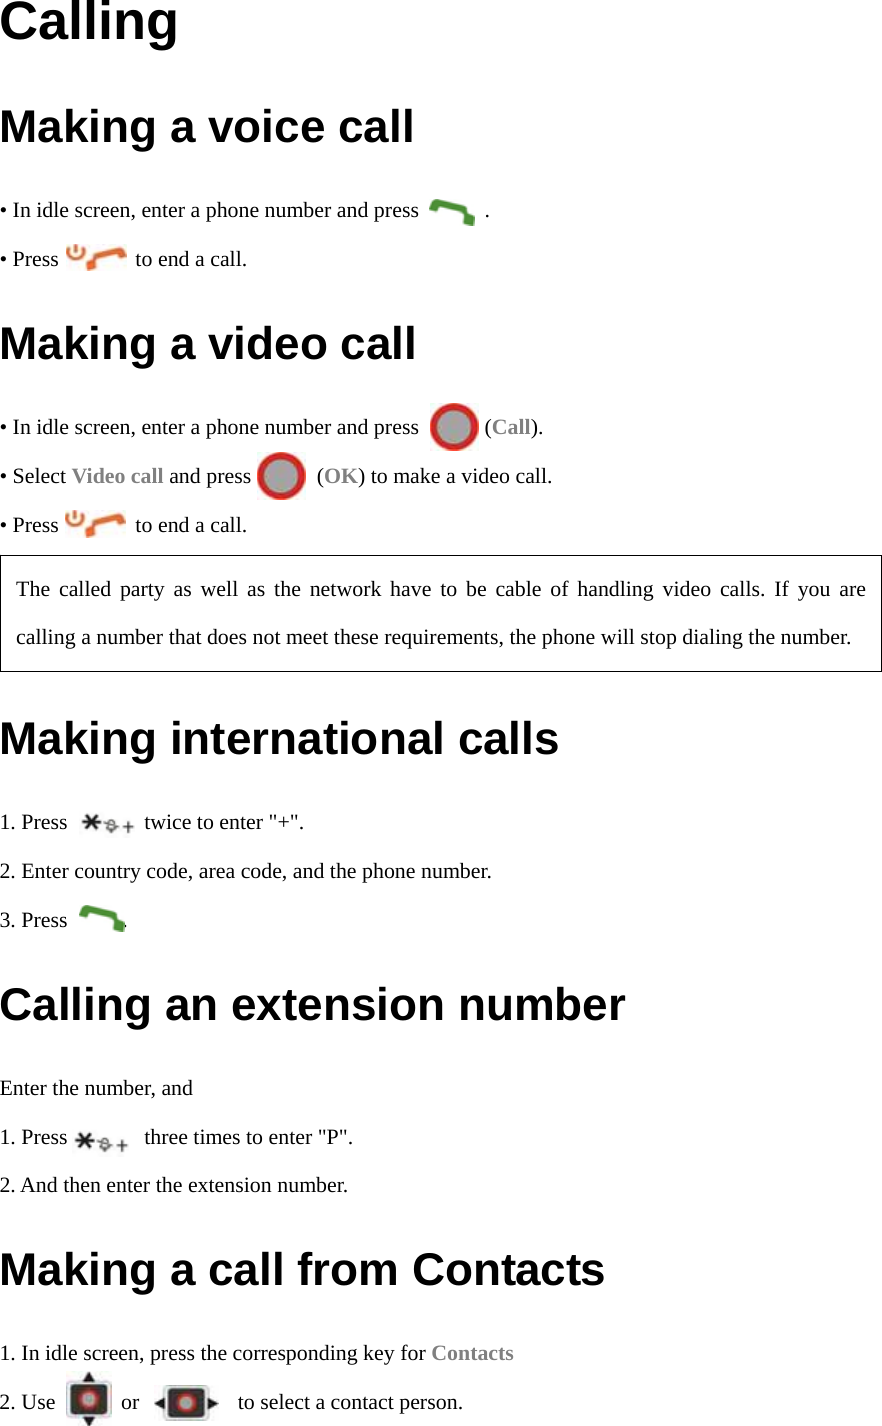 Calling Making a voice call • In idle screen, enter a phone number and press            . • Press       to end a call. Making a video call • In idle screen, enter a phone number and press            (Call). • Select Video call and press      (OK) to make a video call. • Press       to end a call.  Making international calls 1. Press       twice to enter &quot;+&quot;. 2. Enter country code, area code, and the phone number. 3. Press     . Calling an extension number Enter the number, and   1. Press              three times to enter &quot;P&quot;. 2. And then enter the extension number. Making a call from Contacts 1. In idle screen, press the corresponding key for Contacts 2. Use      or         to select a contact person. The called party as well as the network have to be cable of handling video calls. If you are calling a number that does not meet these requirements, the phone will stop dialing the number. 